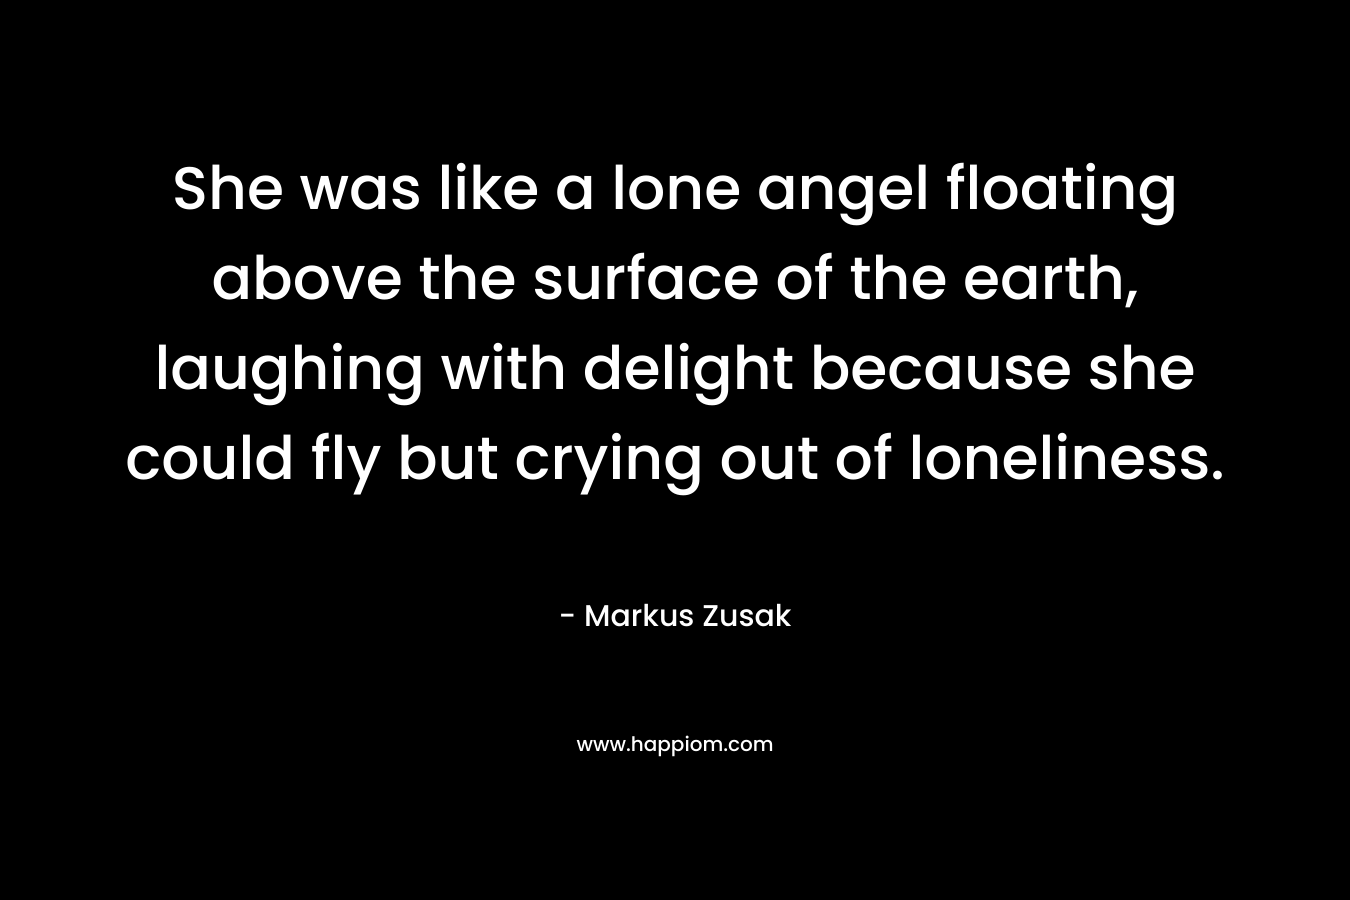 She was like a lone angel floating above the surface of the earth, laughing with delight because she could fly but crying out of loneliness.